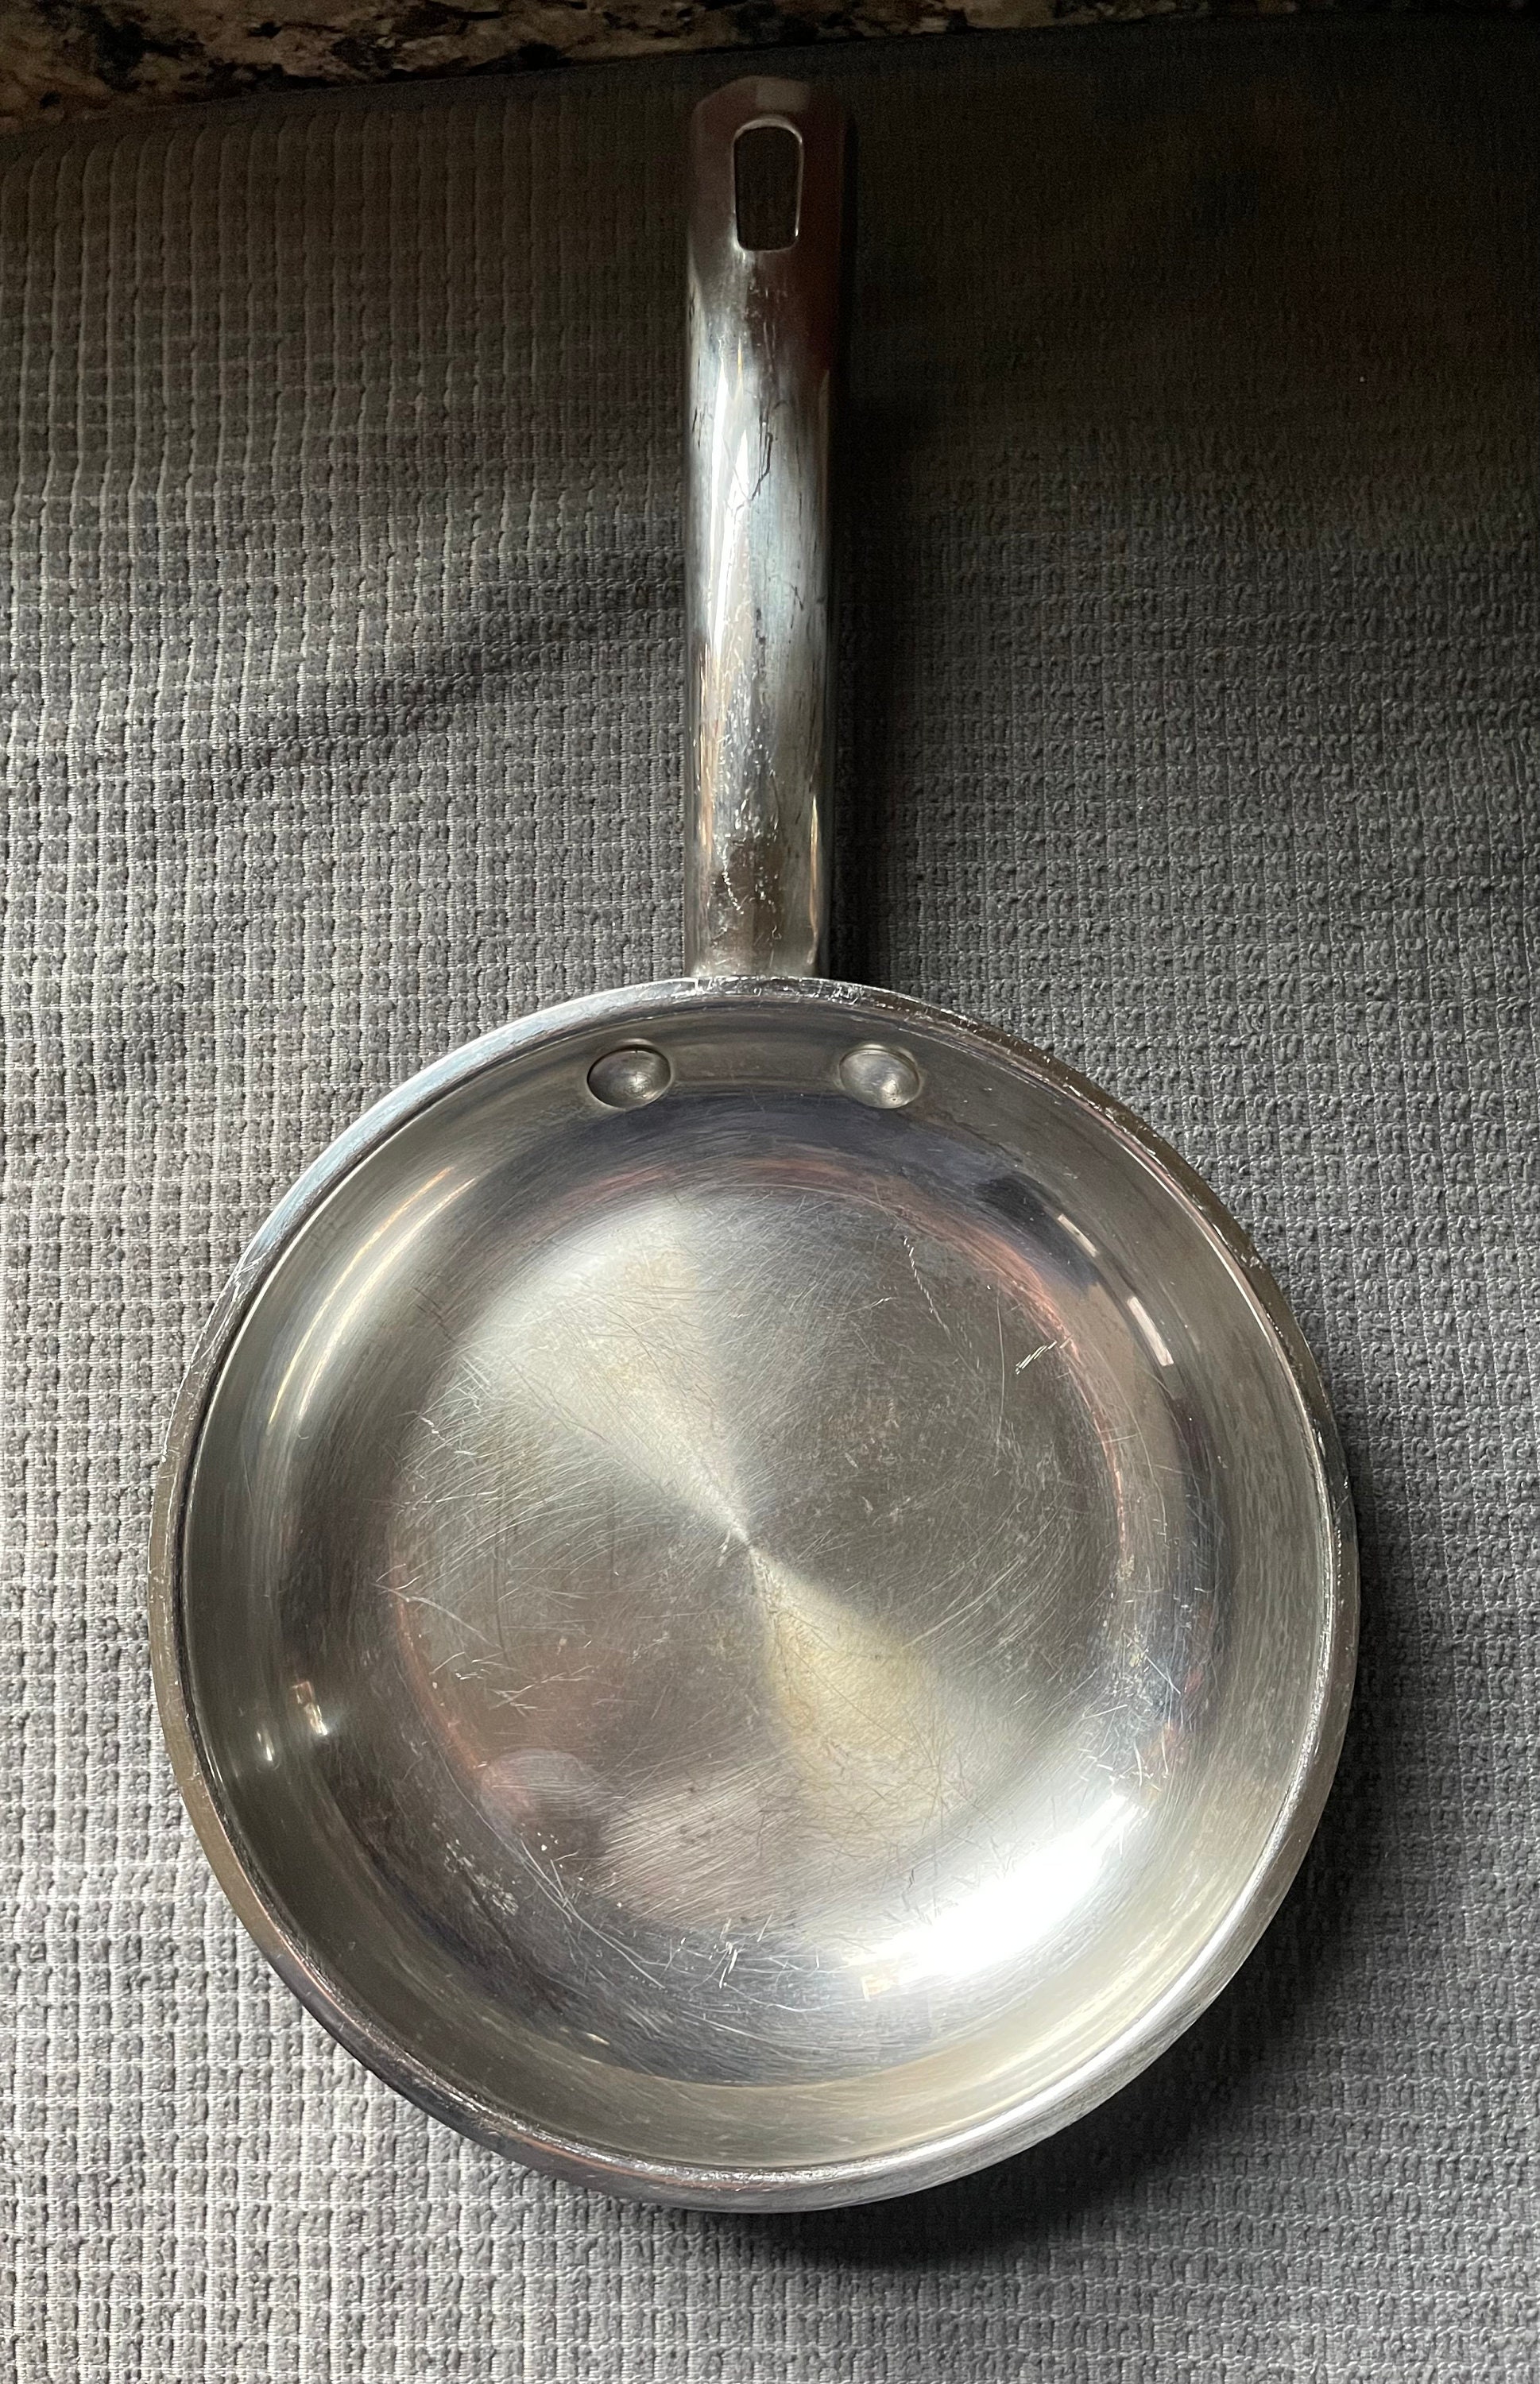 Lot of Various Sized Wolfgang Puck Cookware